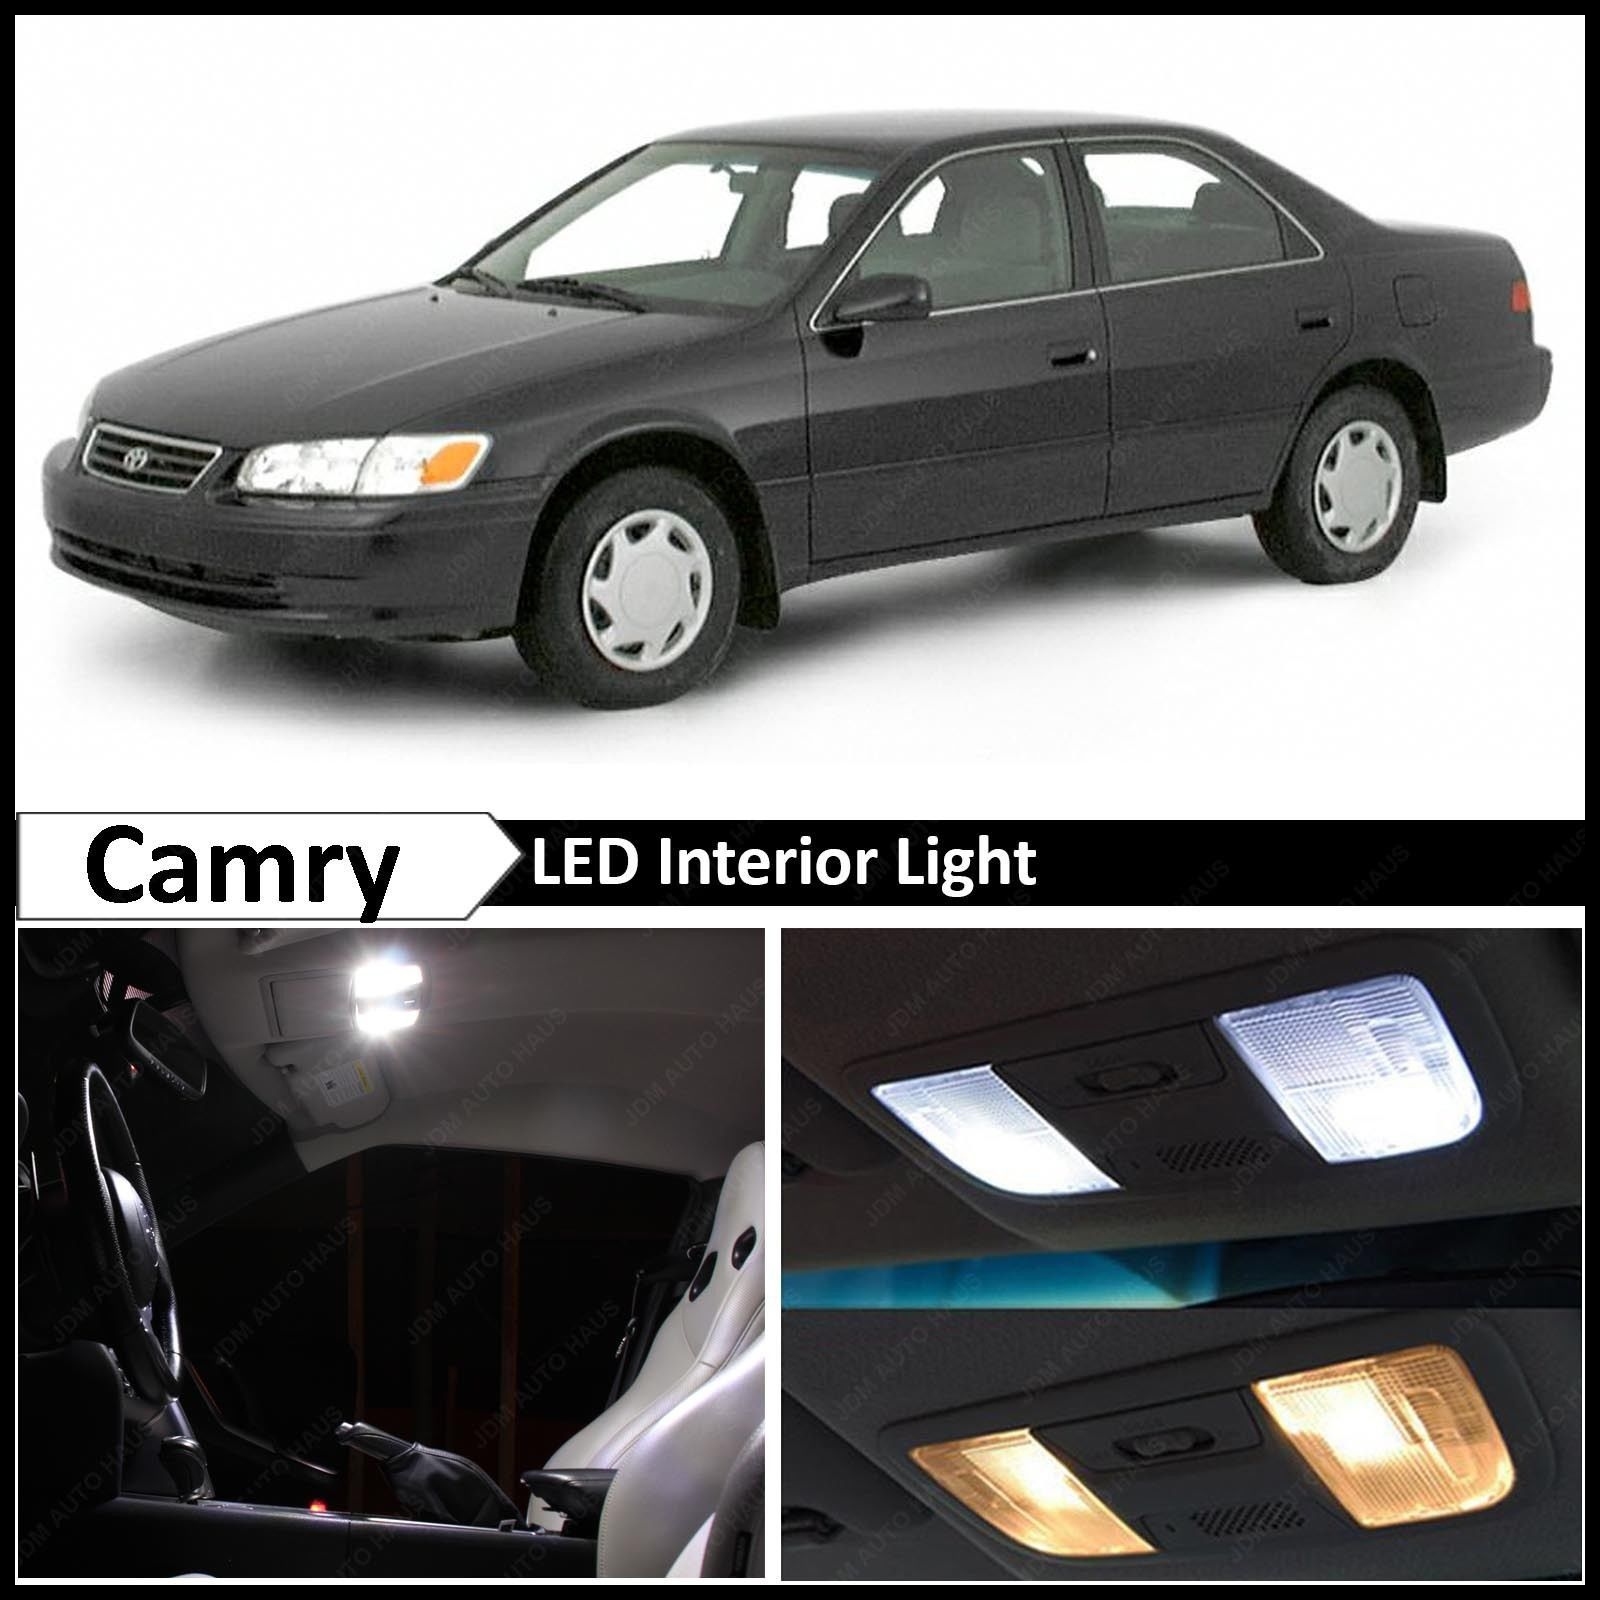 Toyota Camry Interior Luxury Cool Great White Interior Led Lights Package Kit For 1997 2001